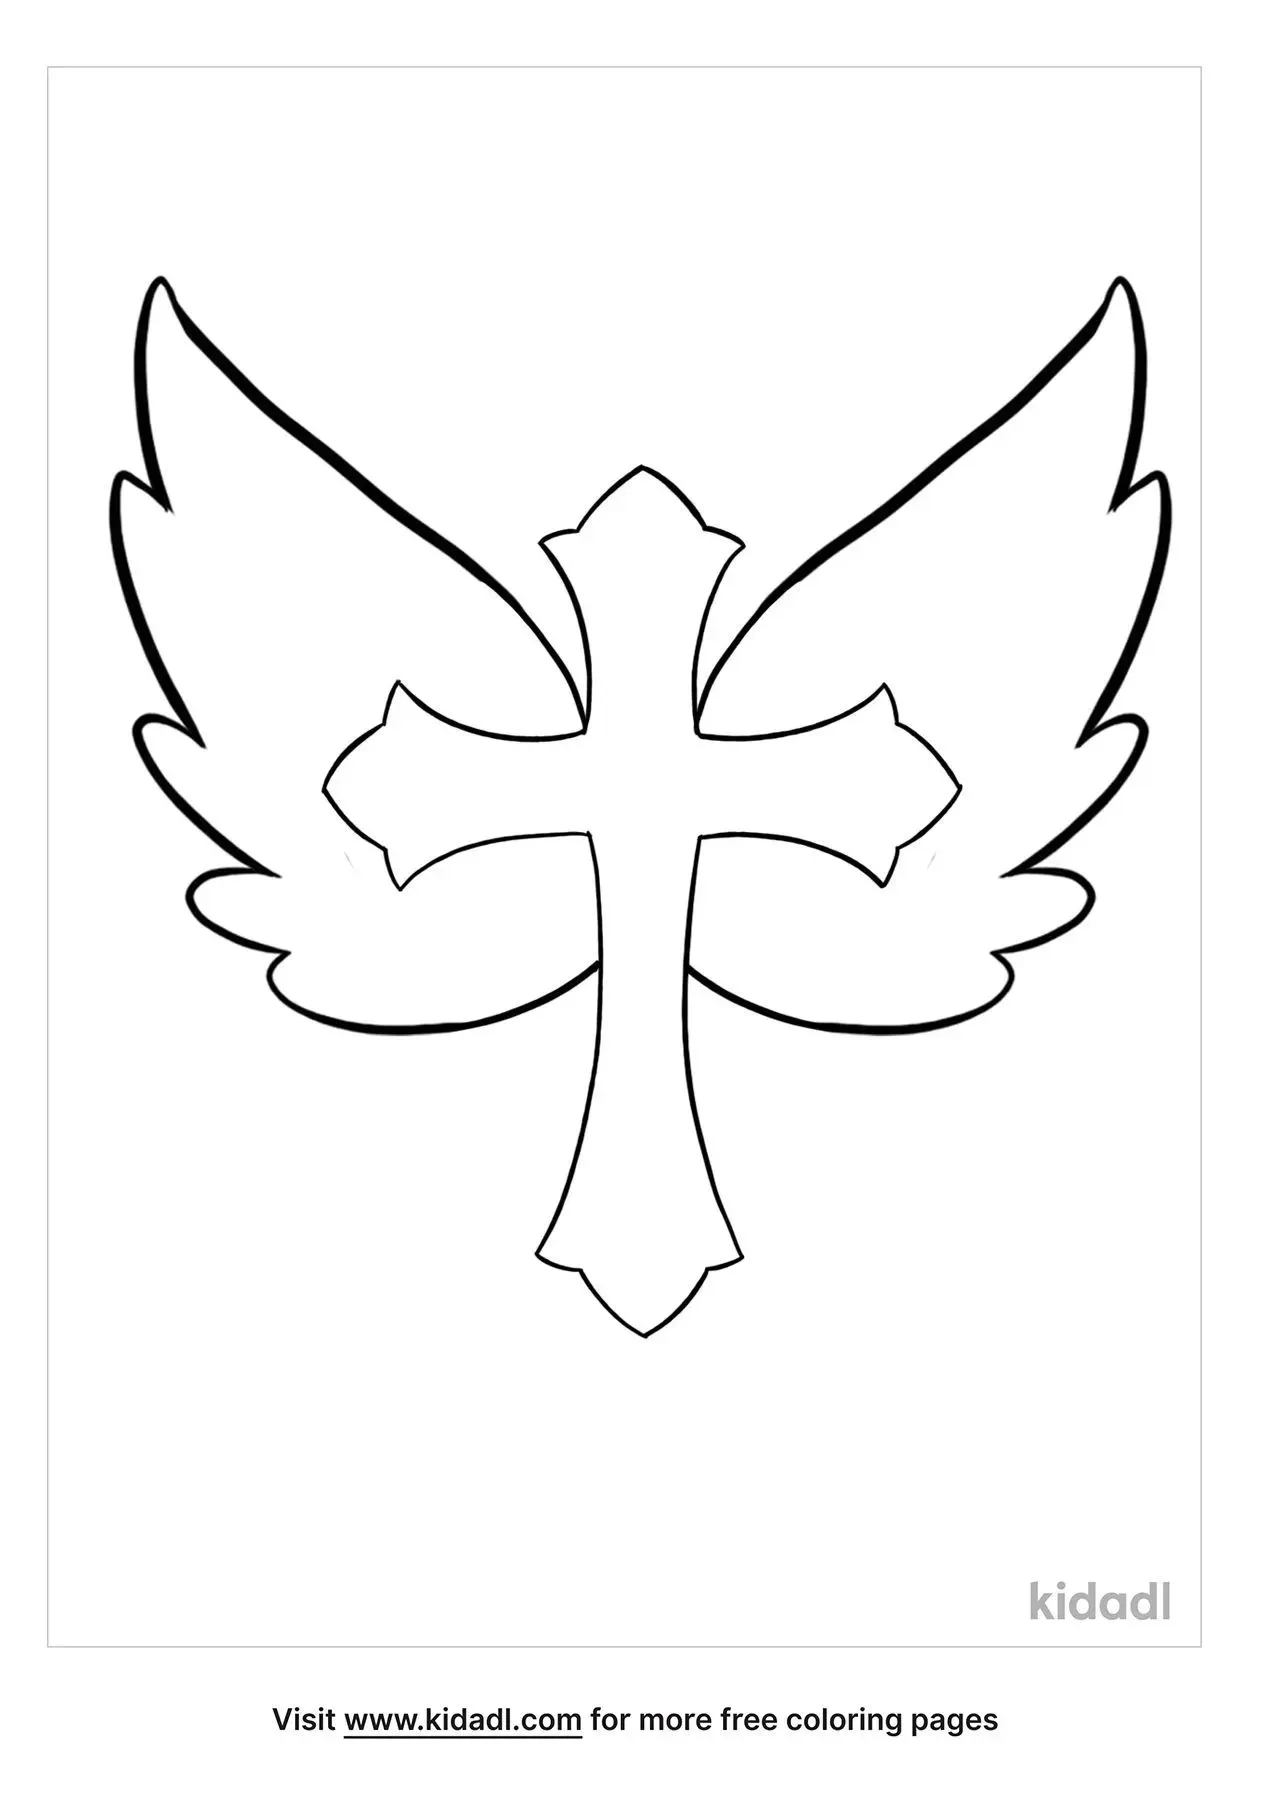 coloring-pages-cross-with-wings